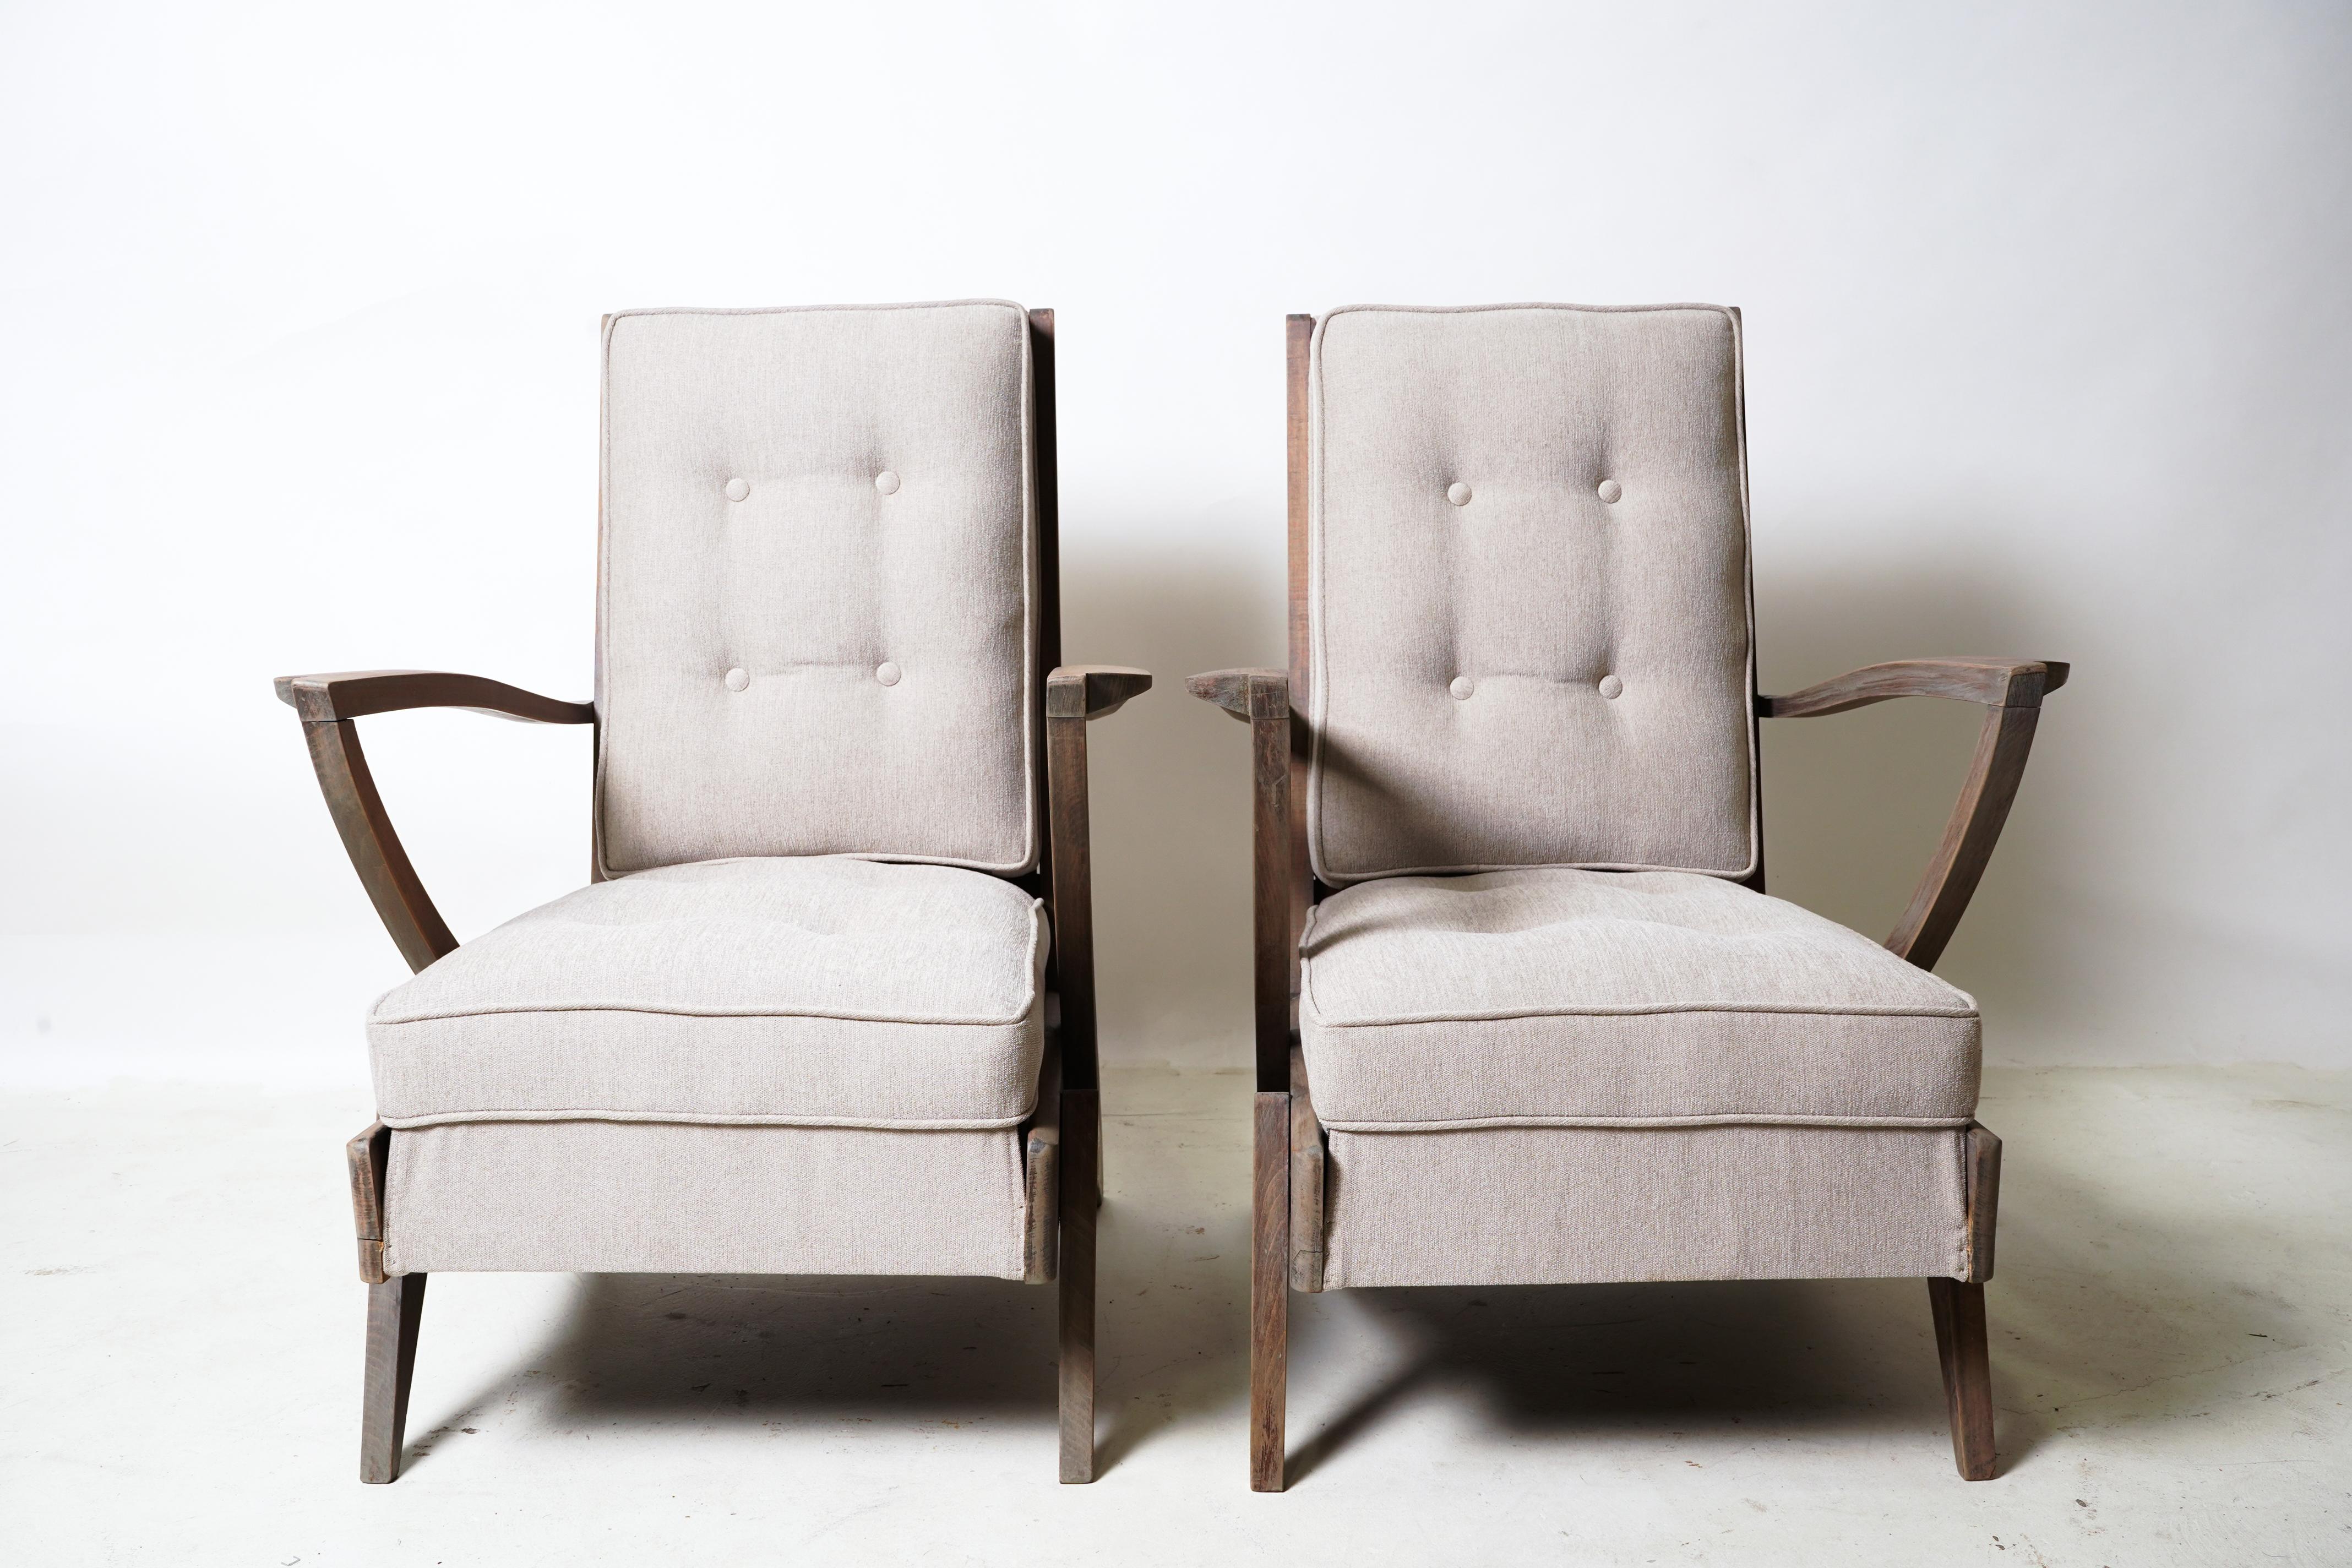 These unique lounge chairs feature solid Beech Wood arms and legs that have an unusually angular design. The chairs are modest in scale and easy to blend into a variety of interior design schemes. The original varnish (much of it worn) was removed